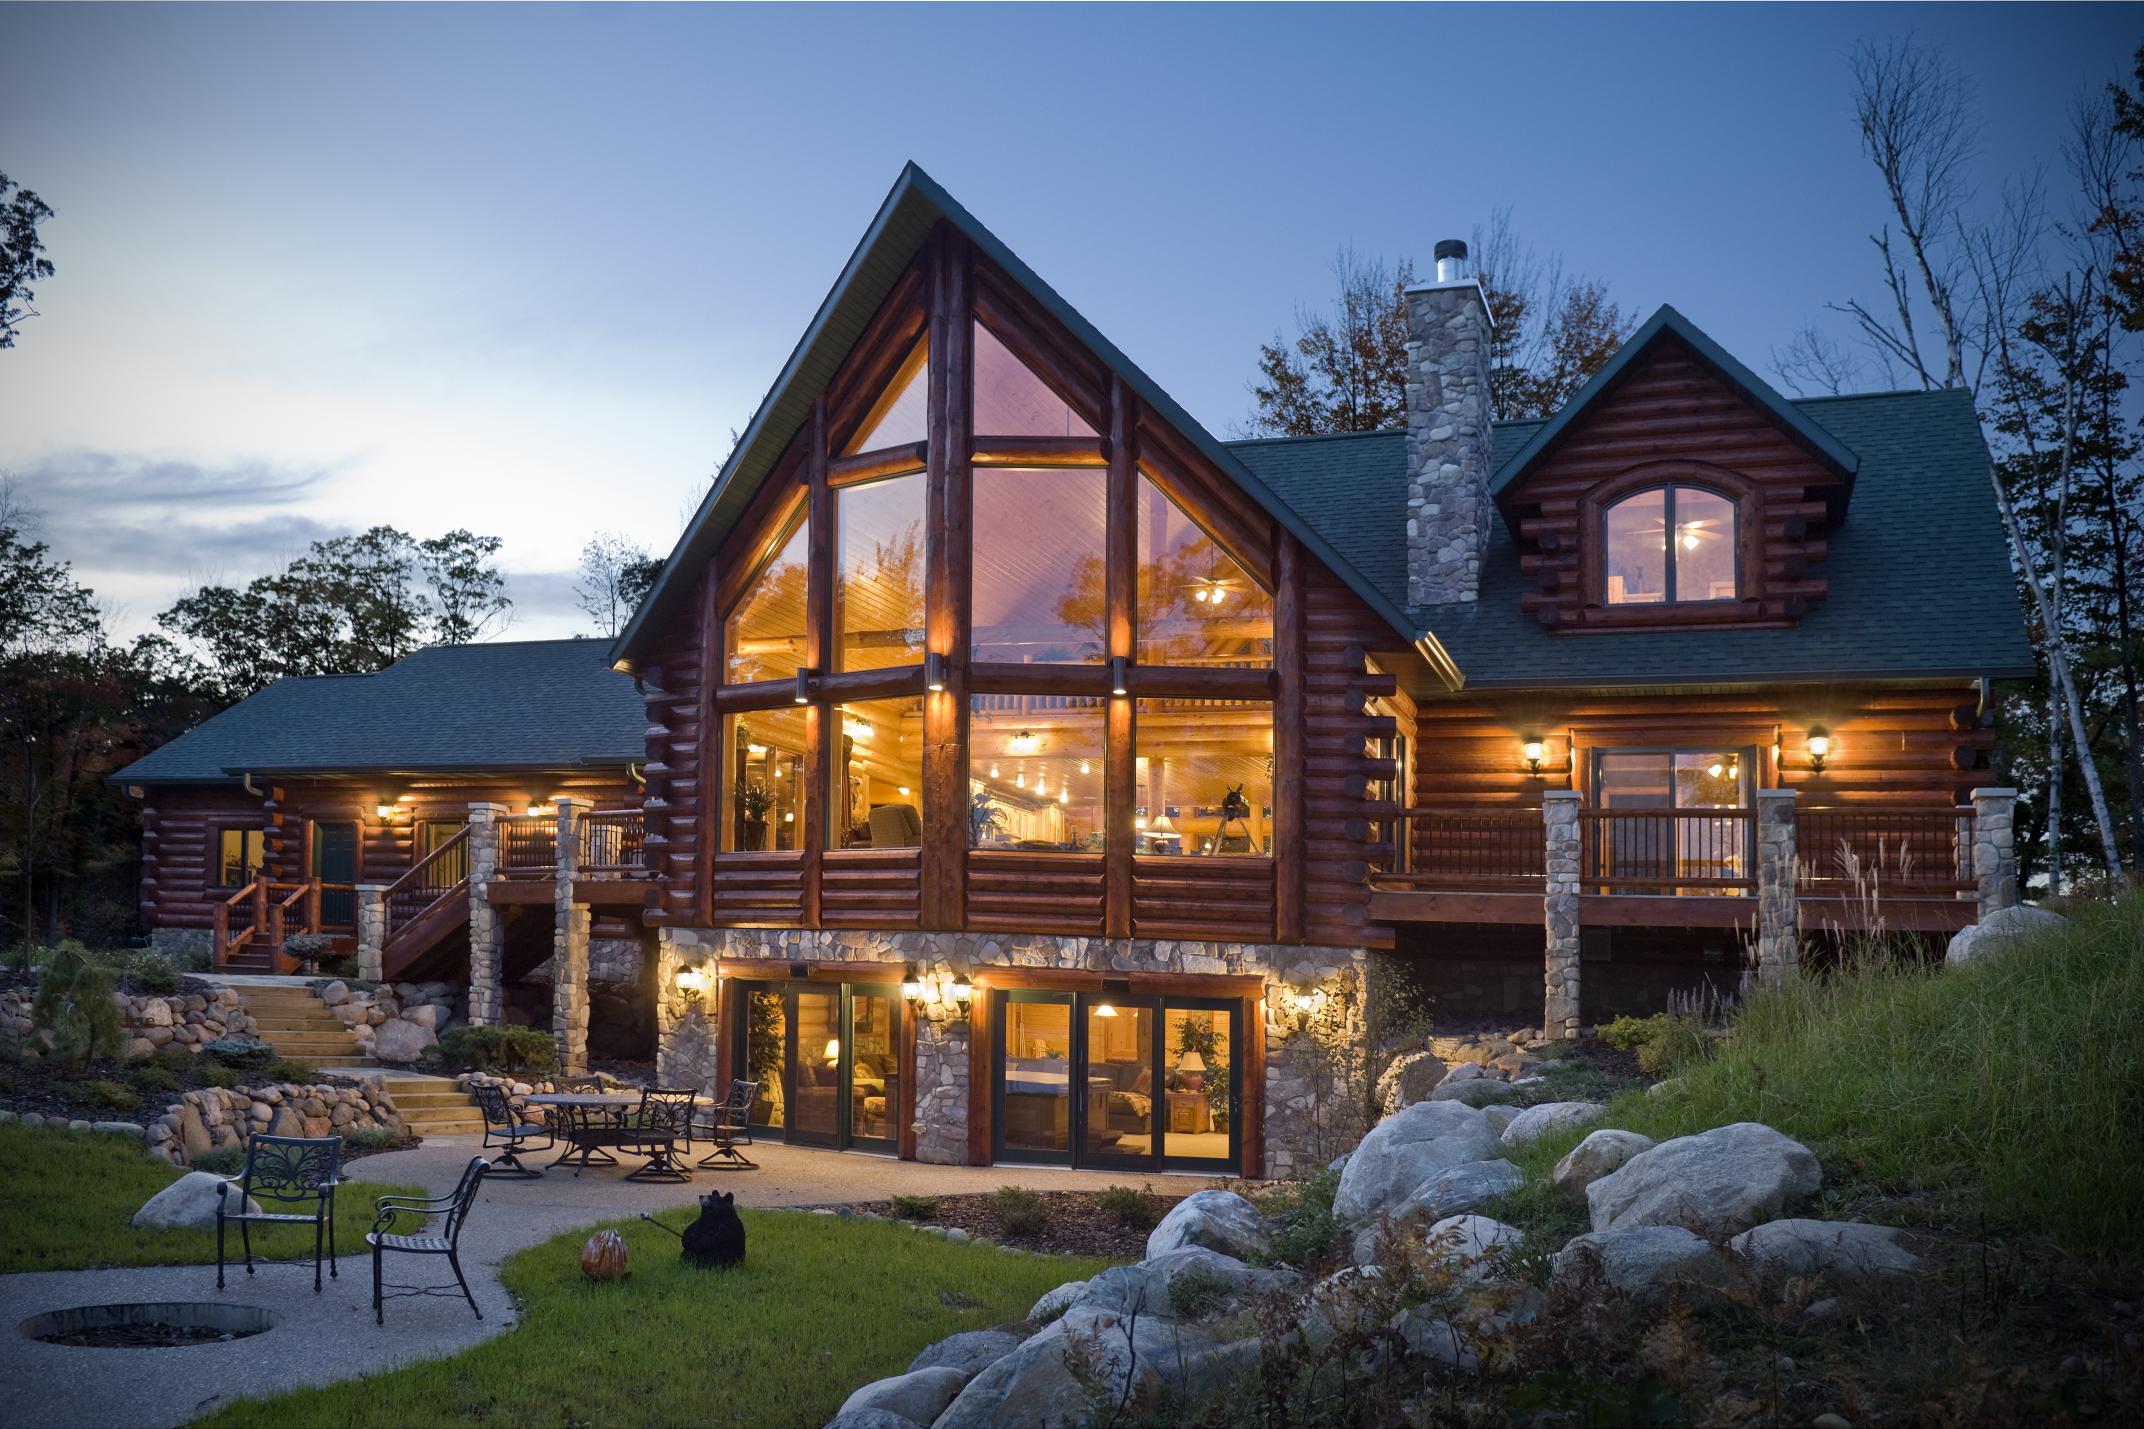 Natural Log Cabin House Neoclassical Architecture Home Design